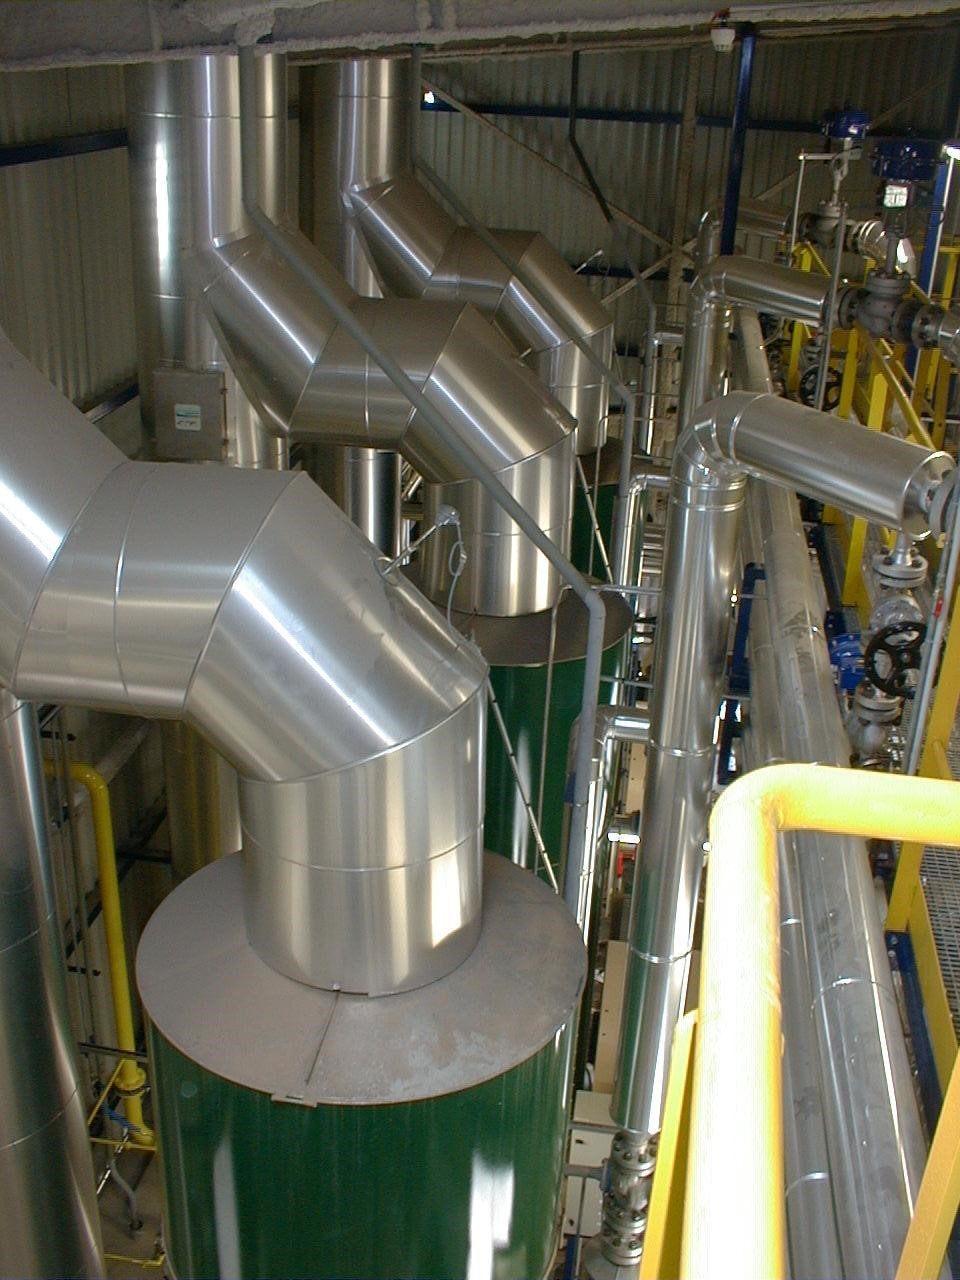 Cognis, a chemical company, uses four Clayton Steam Generators to provide high pressure steam